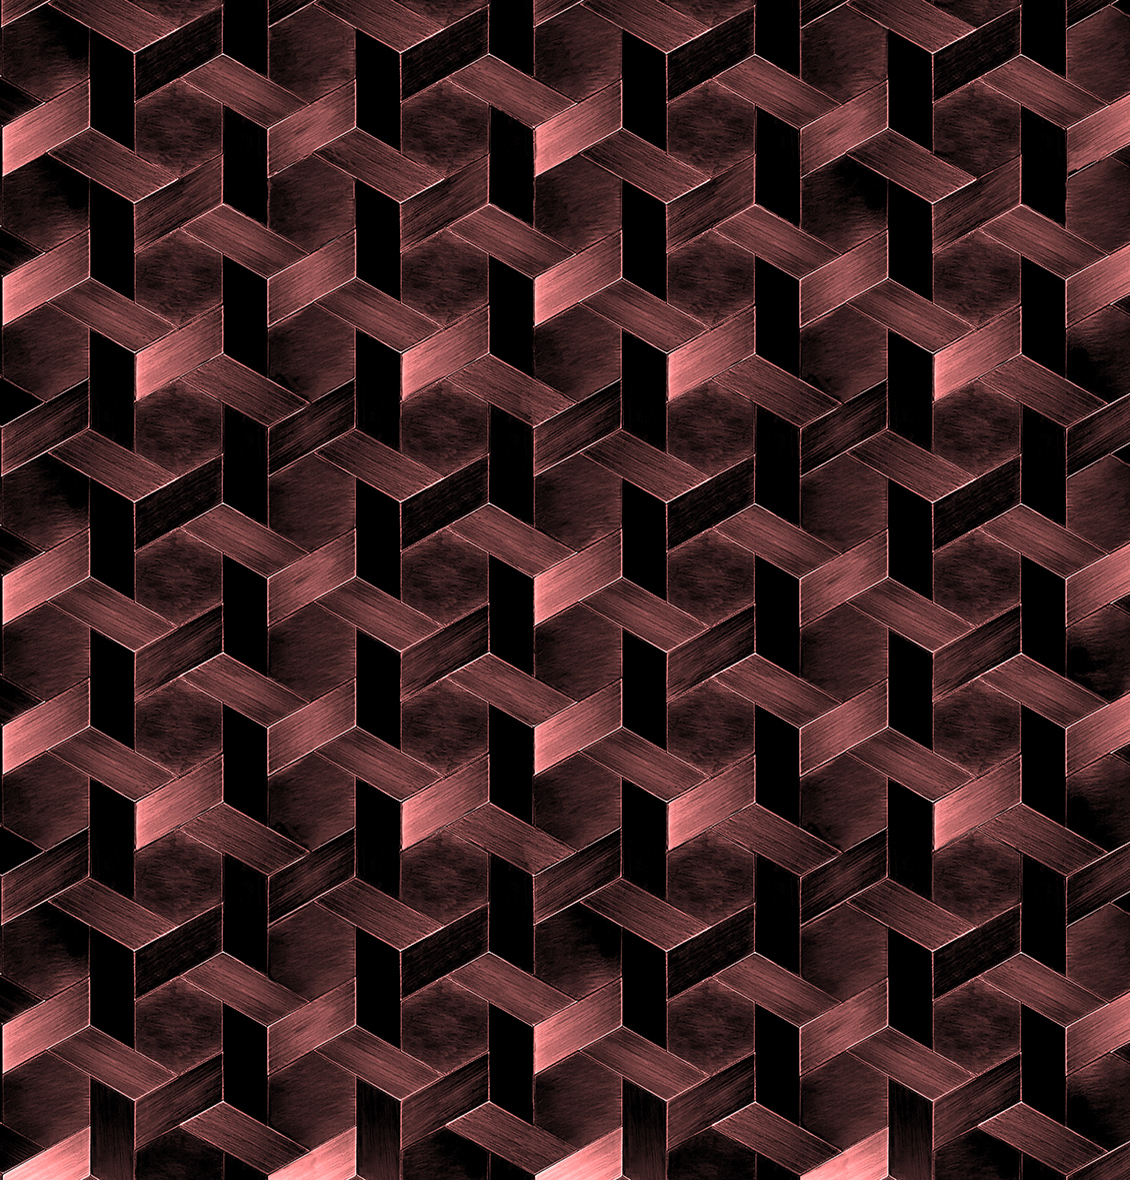 Optical geometric wallpaper with copper-coloured decorative pattern, on a black background